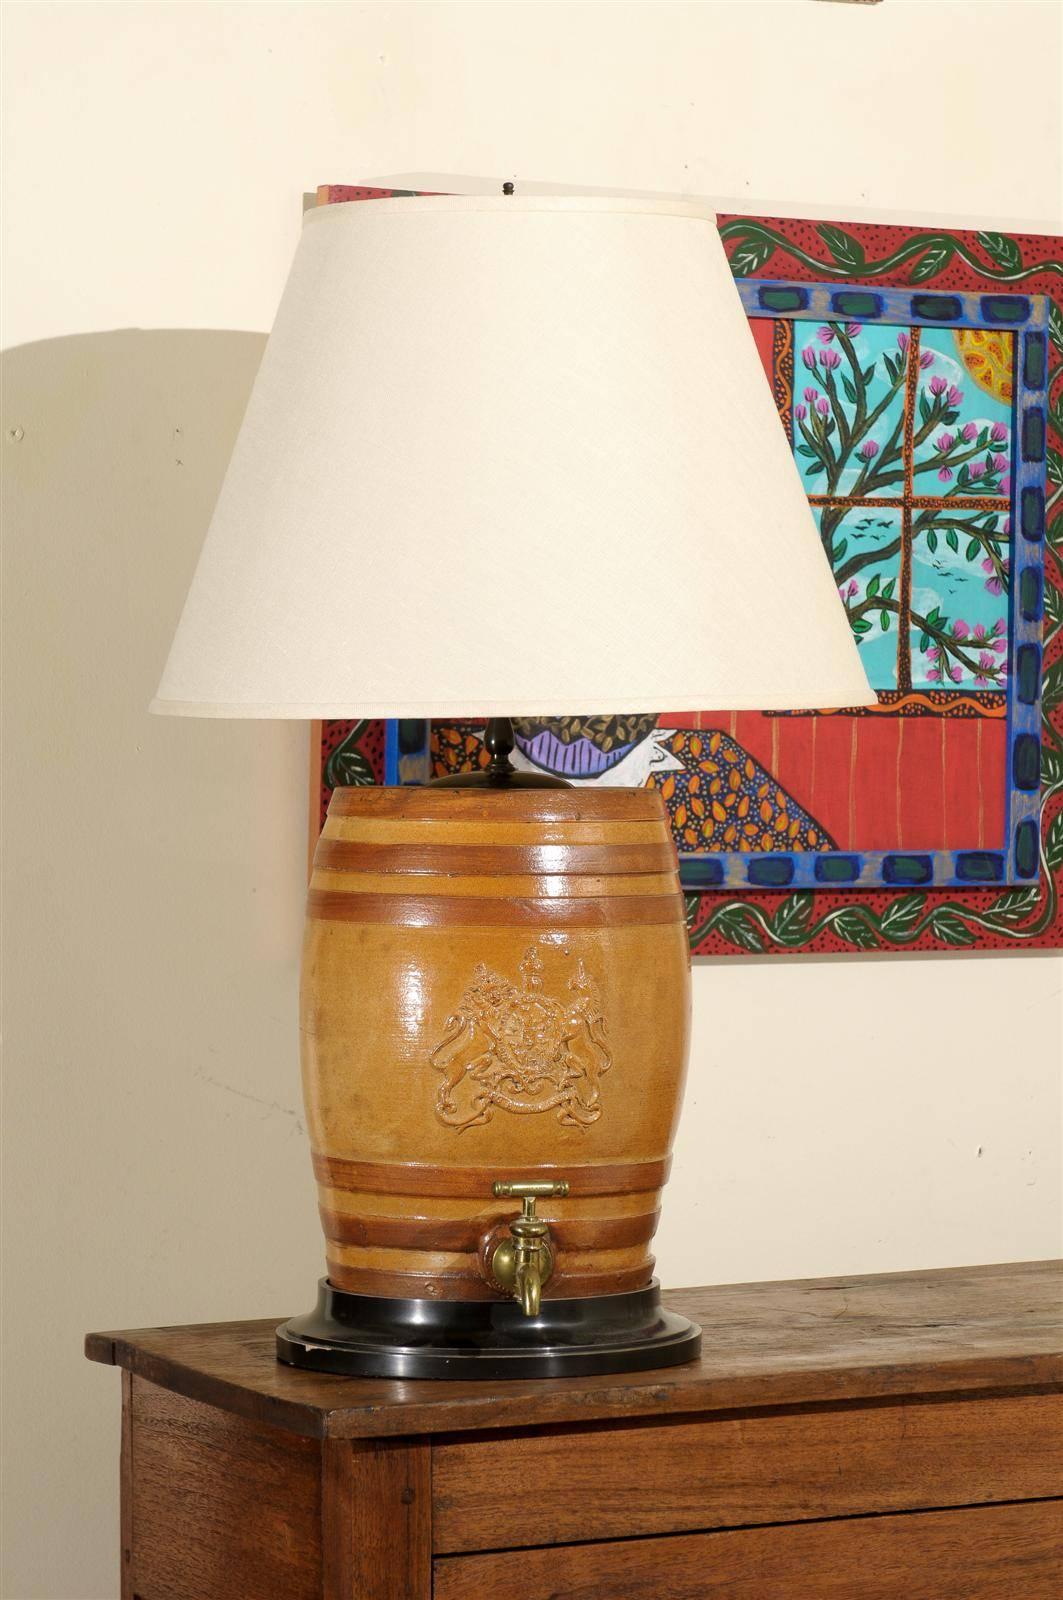 This handsome English water filter converted to a lamp is adorned with a coat of arms bearing a rampart lion and unicorn. It is in neutral tones of caramel and beige. It would add greatly to the Ambience of any room.